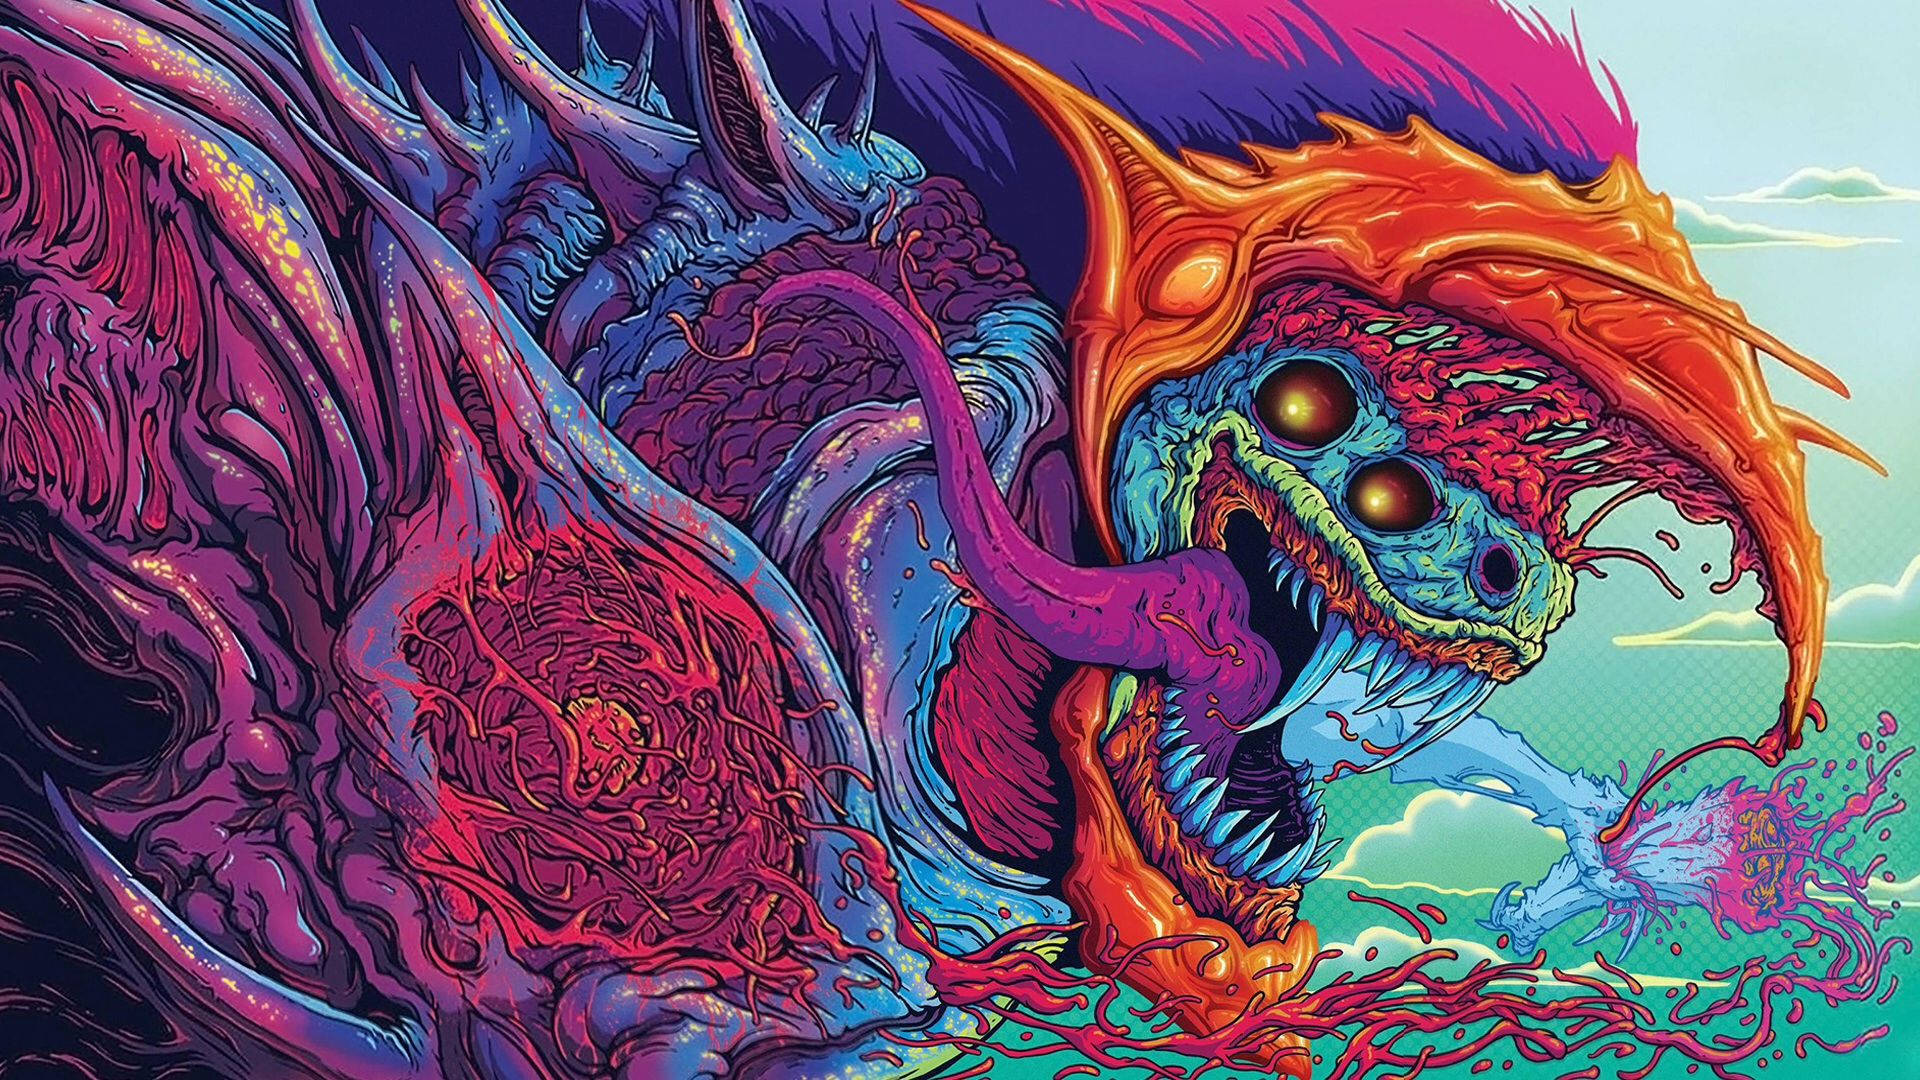 Enter the Hyper-Beast Psychedelic Realm Wallpaper